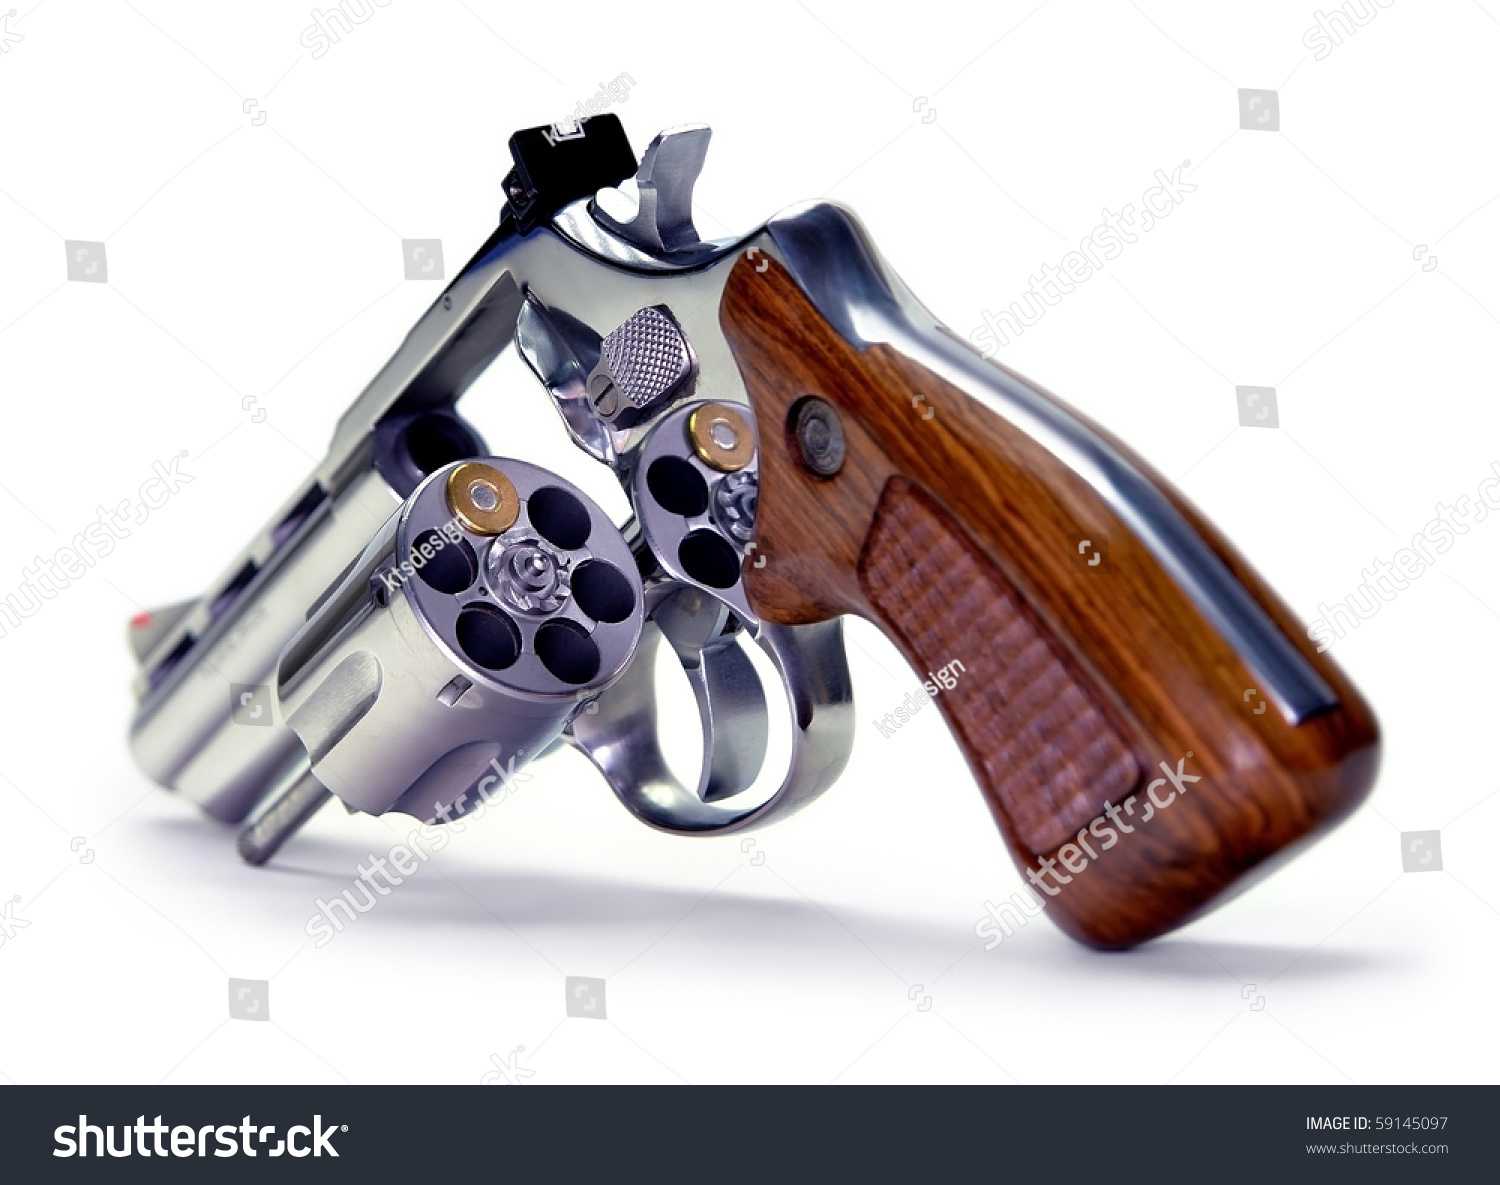 stock-photo-russian-roulette-with-the-bullet-out-concept-of-play-risking-his-own-life-59145097.jpg